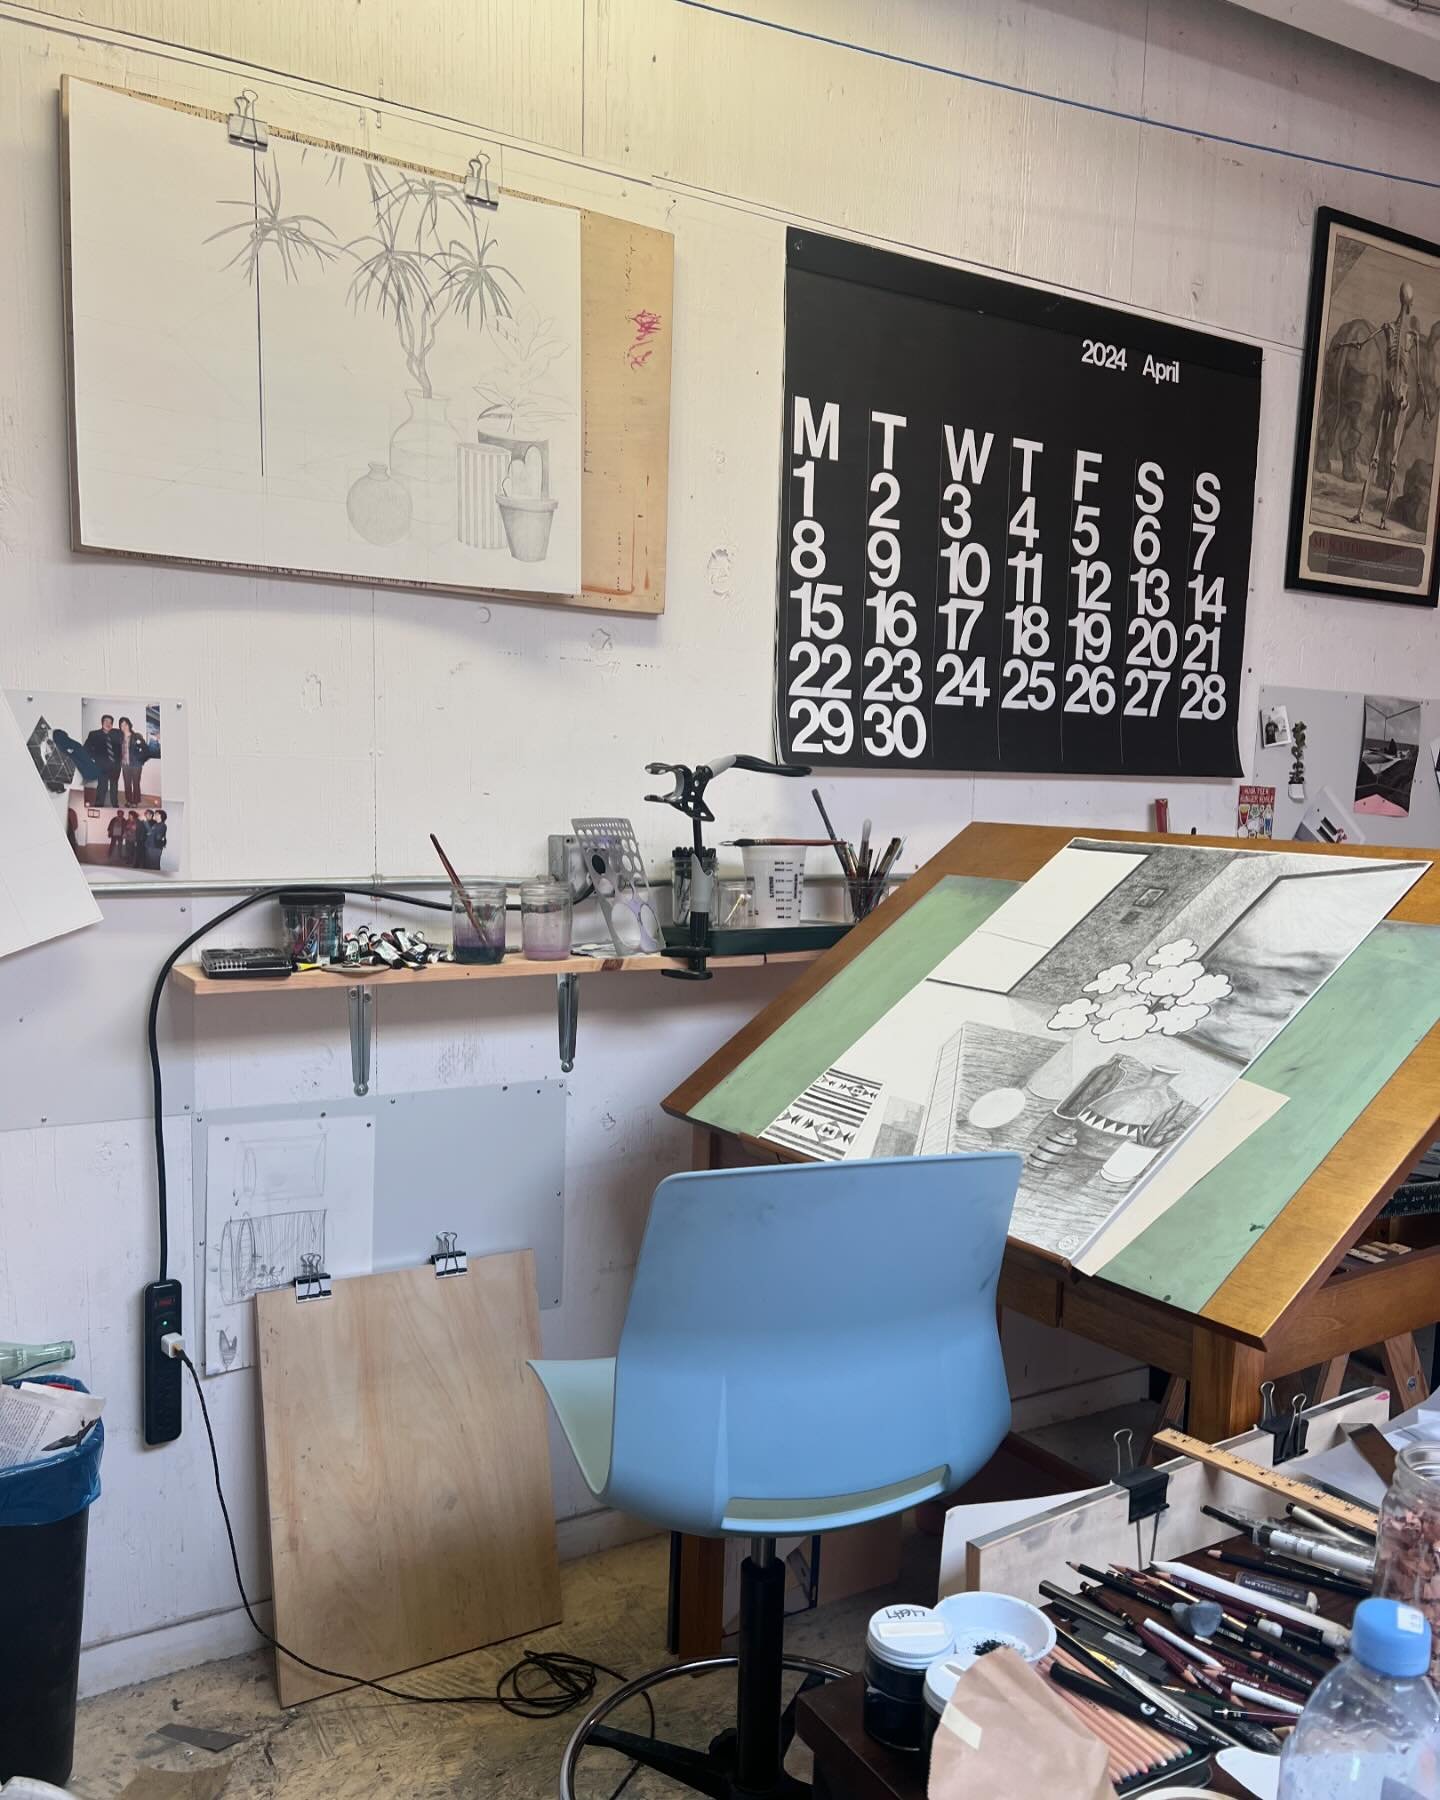 Drawing table. Studio interior with works in progress. #graphitedrawing #wip #arehashtagsreallydead